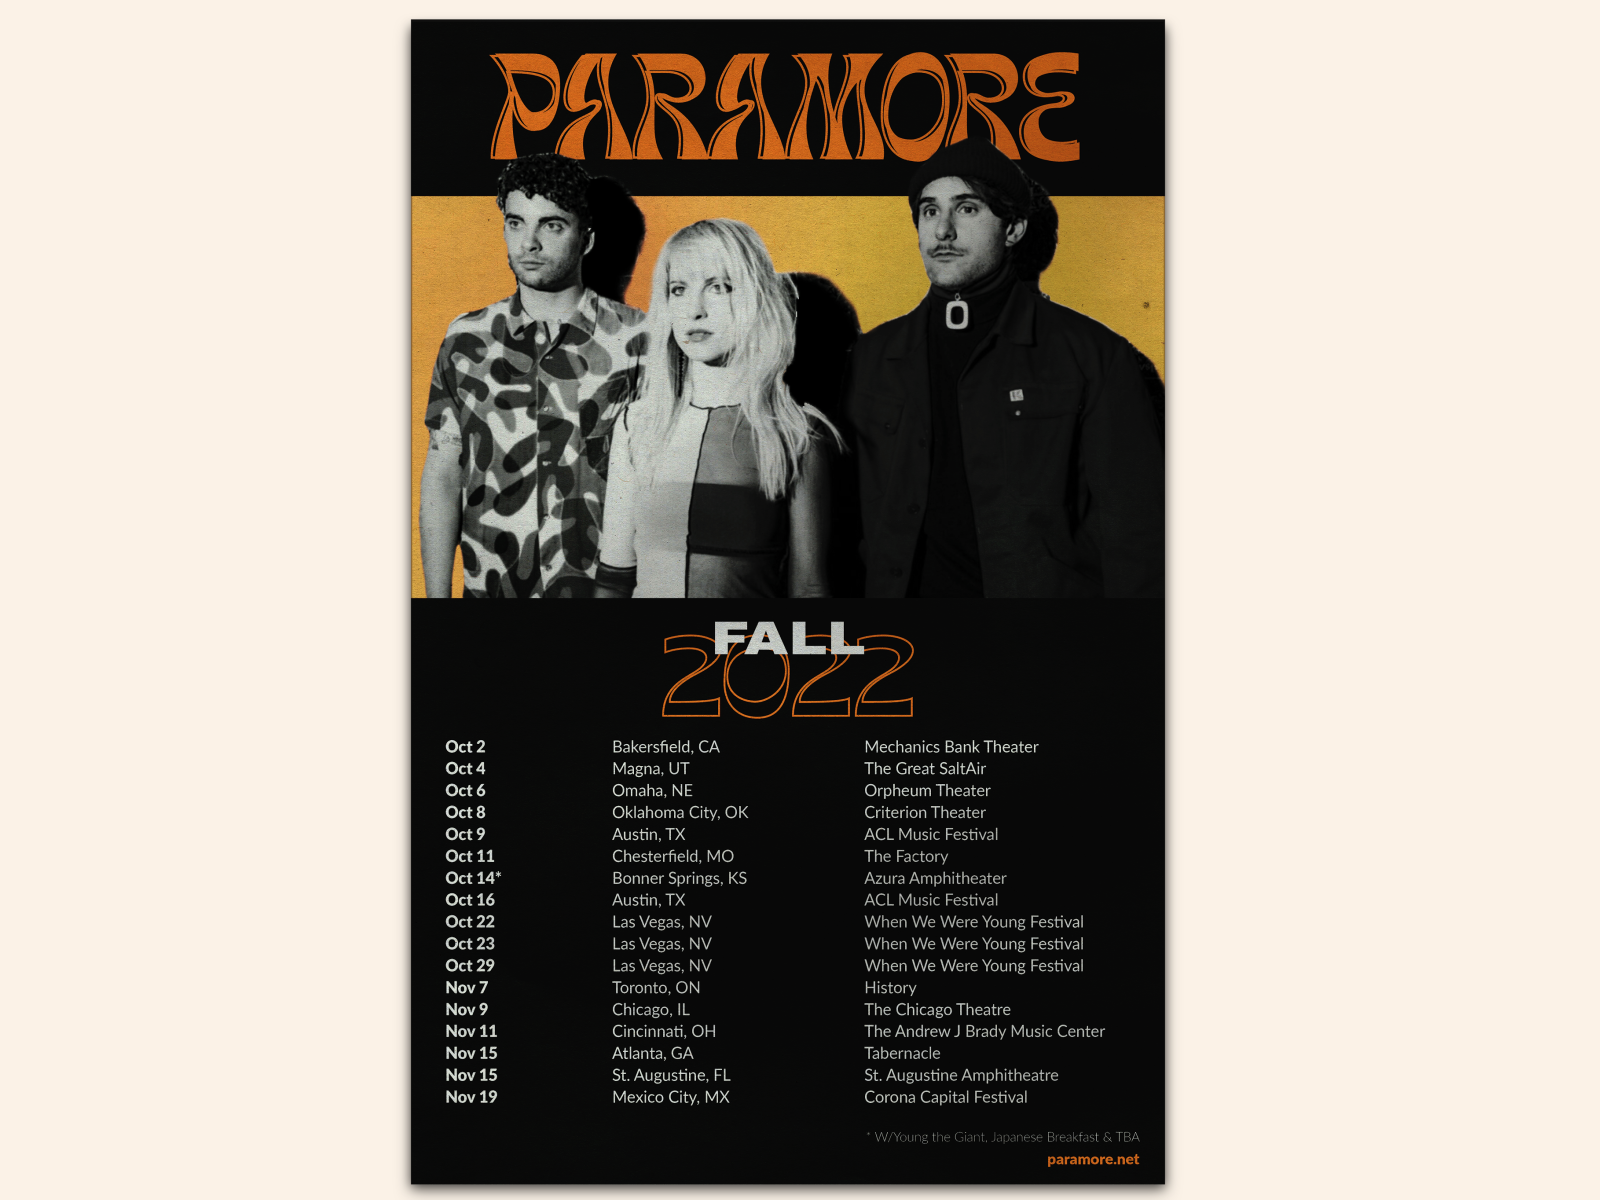 Paramore tour poster redesign by Vanessa Gaspard on Dribbble